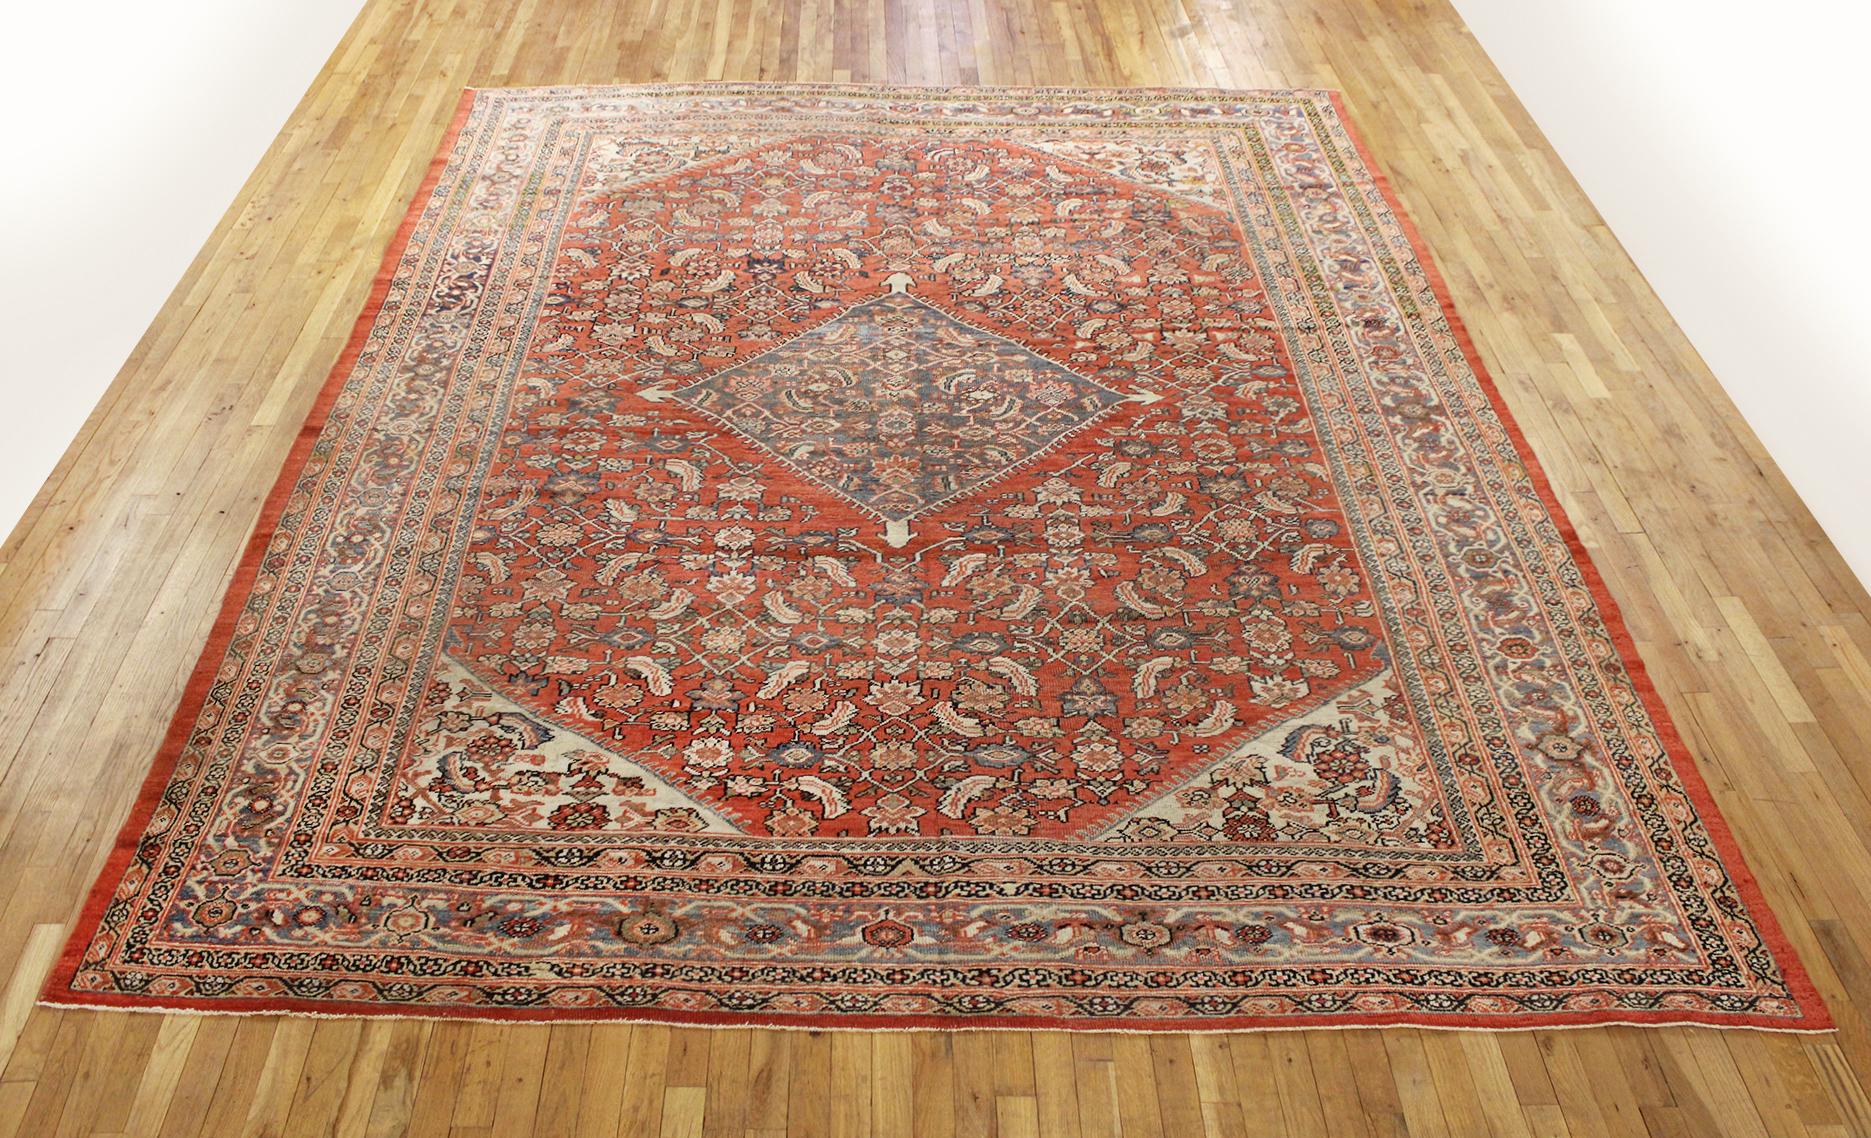 Antique Persian Sultanabad Rug, Room size, circa 1900

A one-of-a-kind antique Persian Sultanabad oriental carpet, hand-knotted with short wool pile. This lovely hand-knotted carpet features a central medallion on a coral primary field, with a light